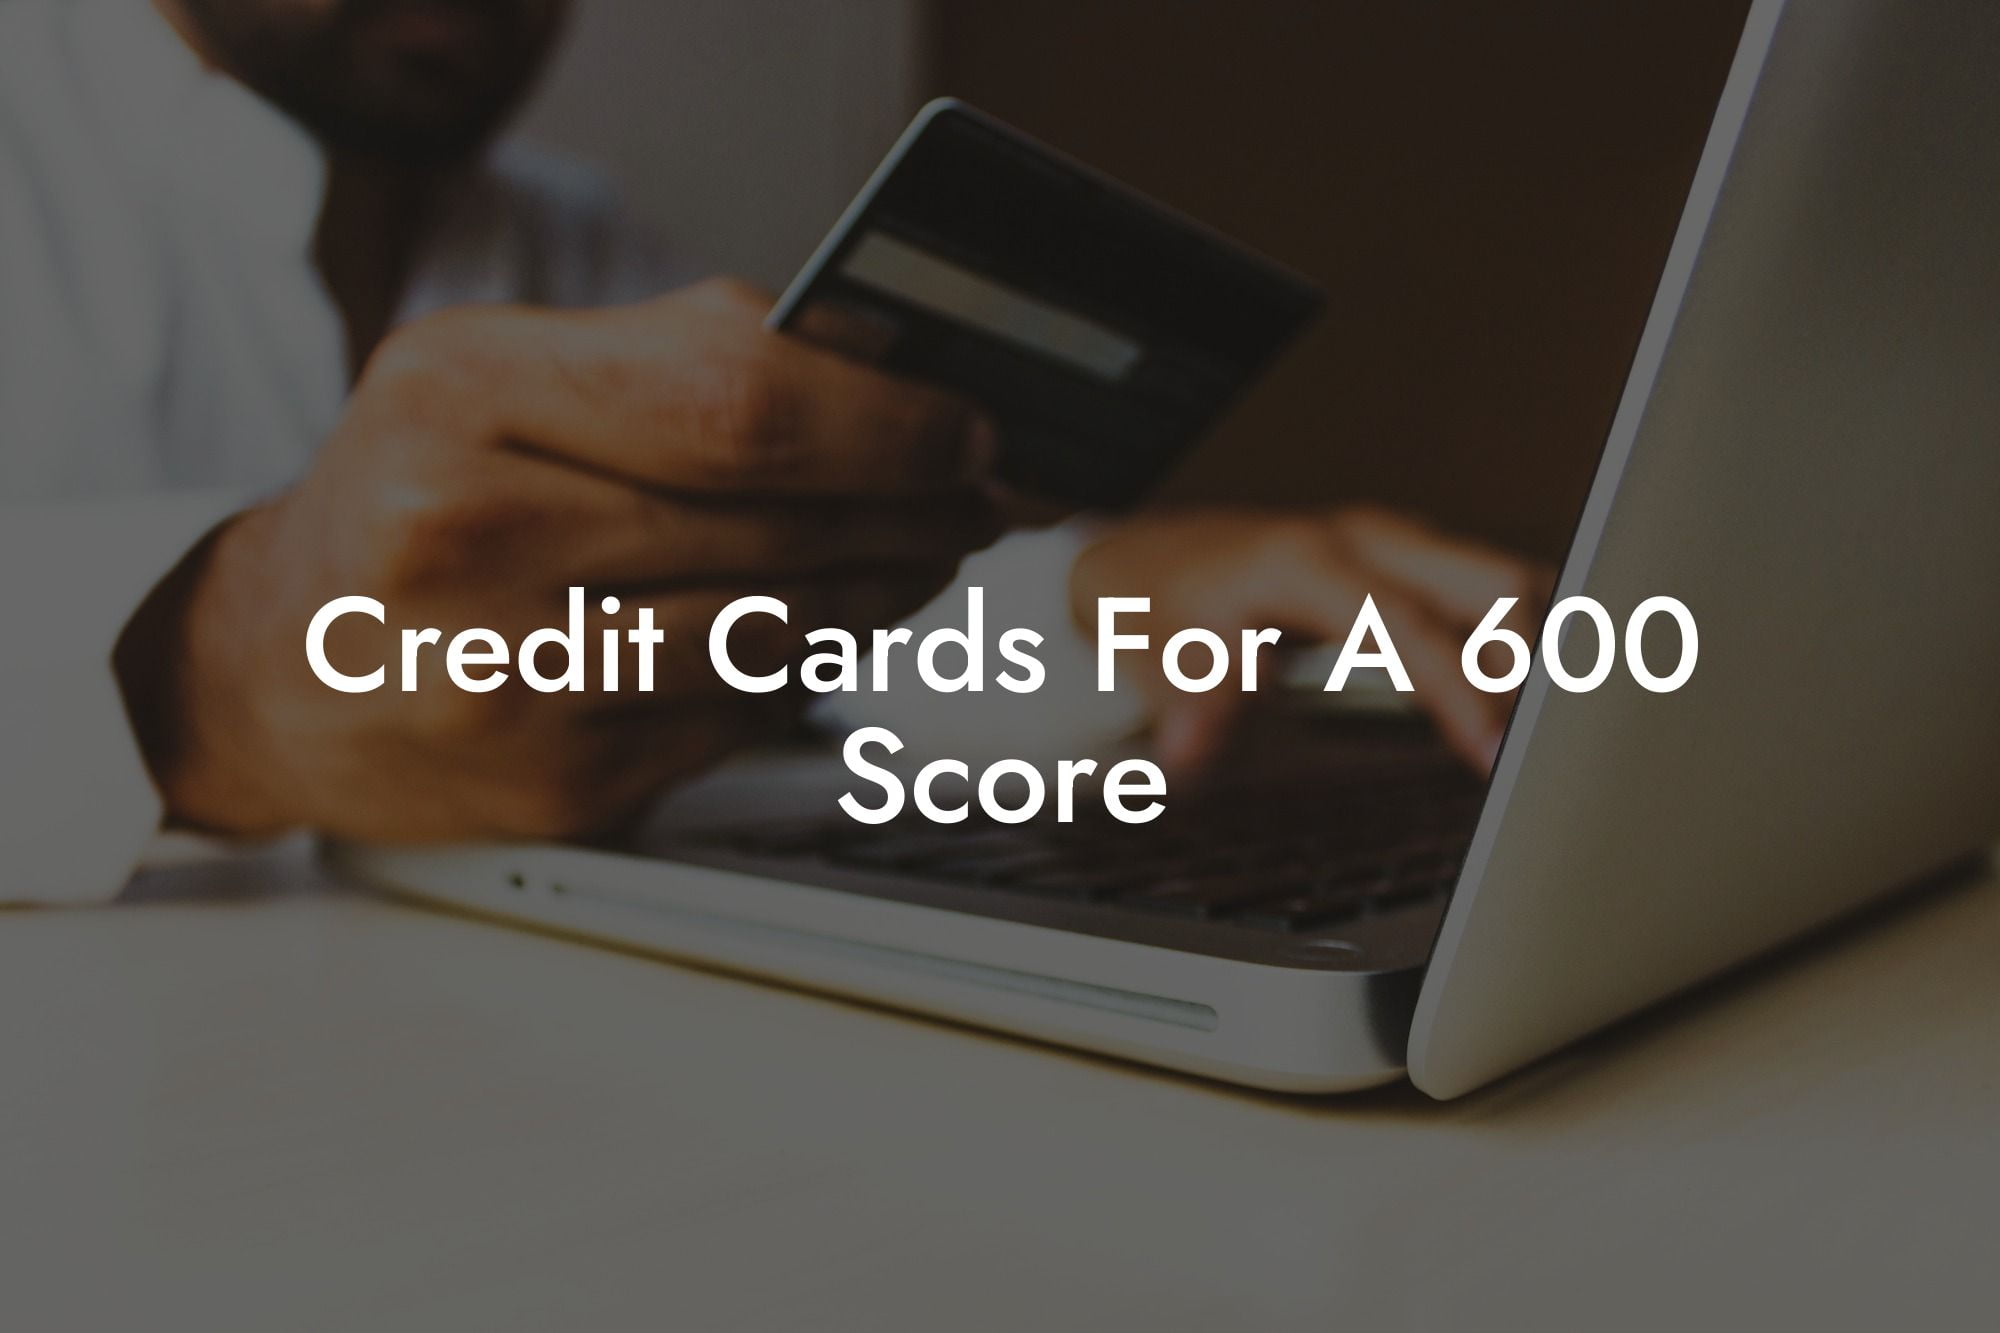 Credit Cards For A 600 Score